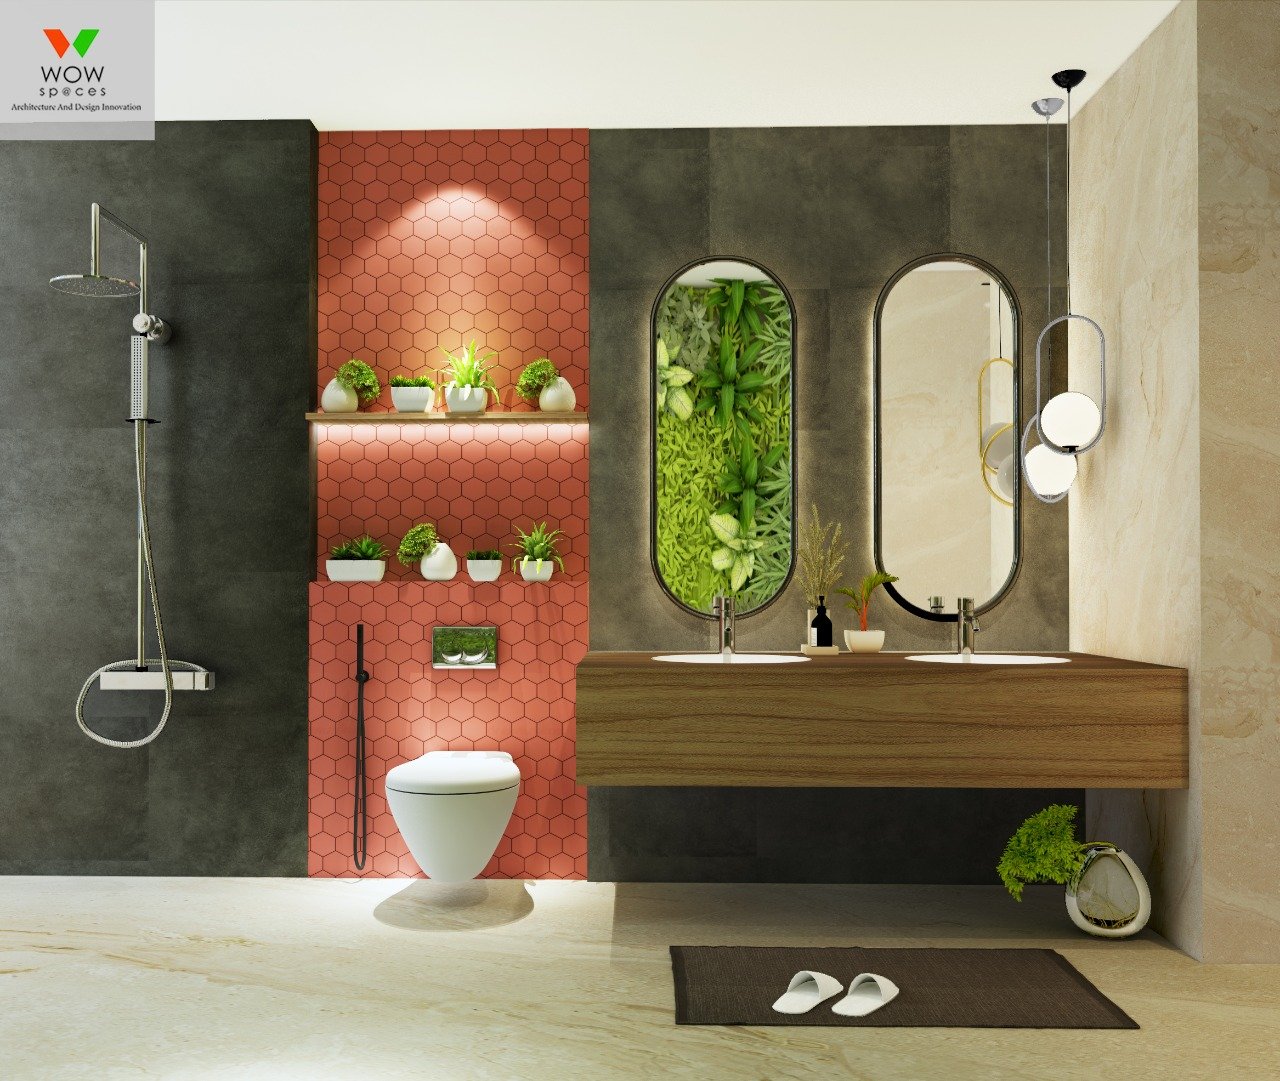 <span  class="uc_style_uc_tiles_grid_image_elementor_uc_items_attribute_title" style="color:#ffffff;">BATHROOM 8</span>